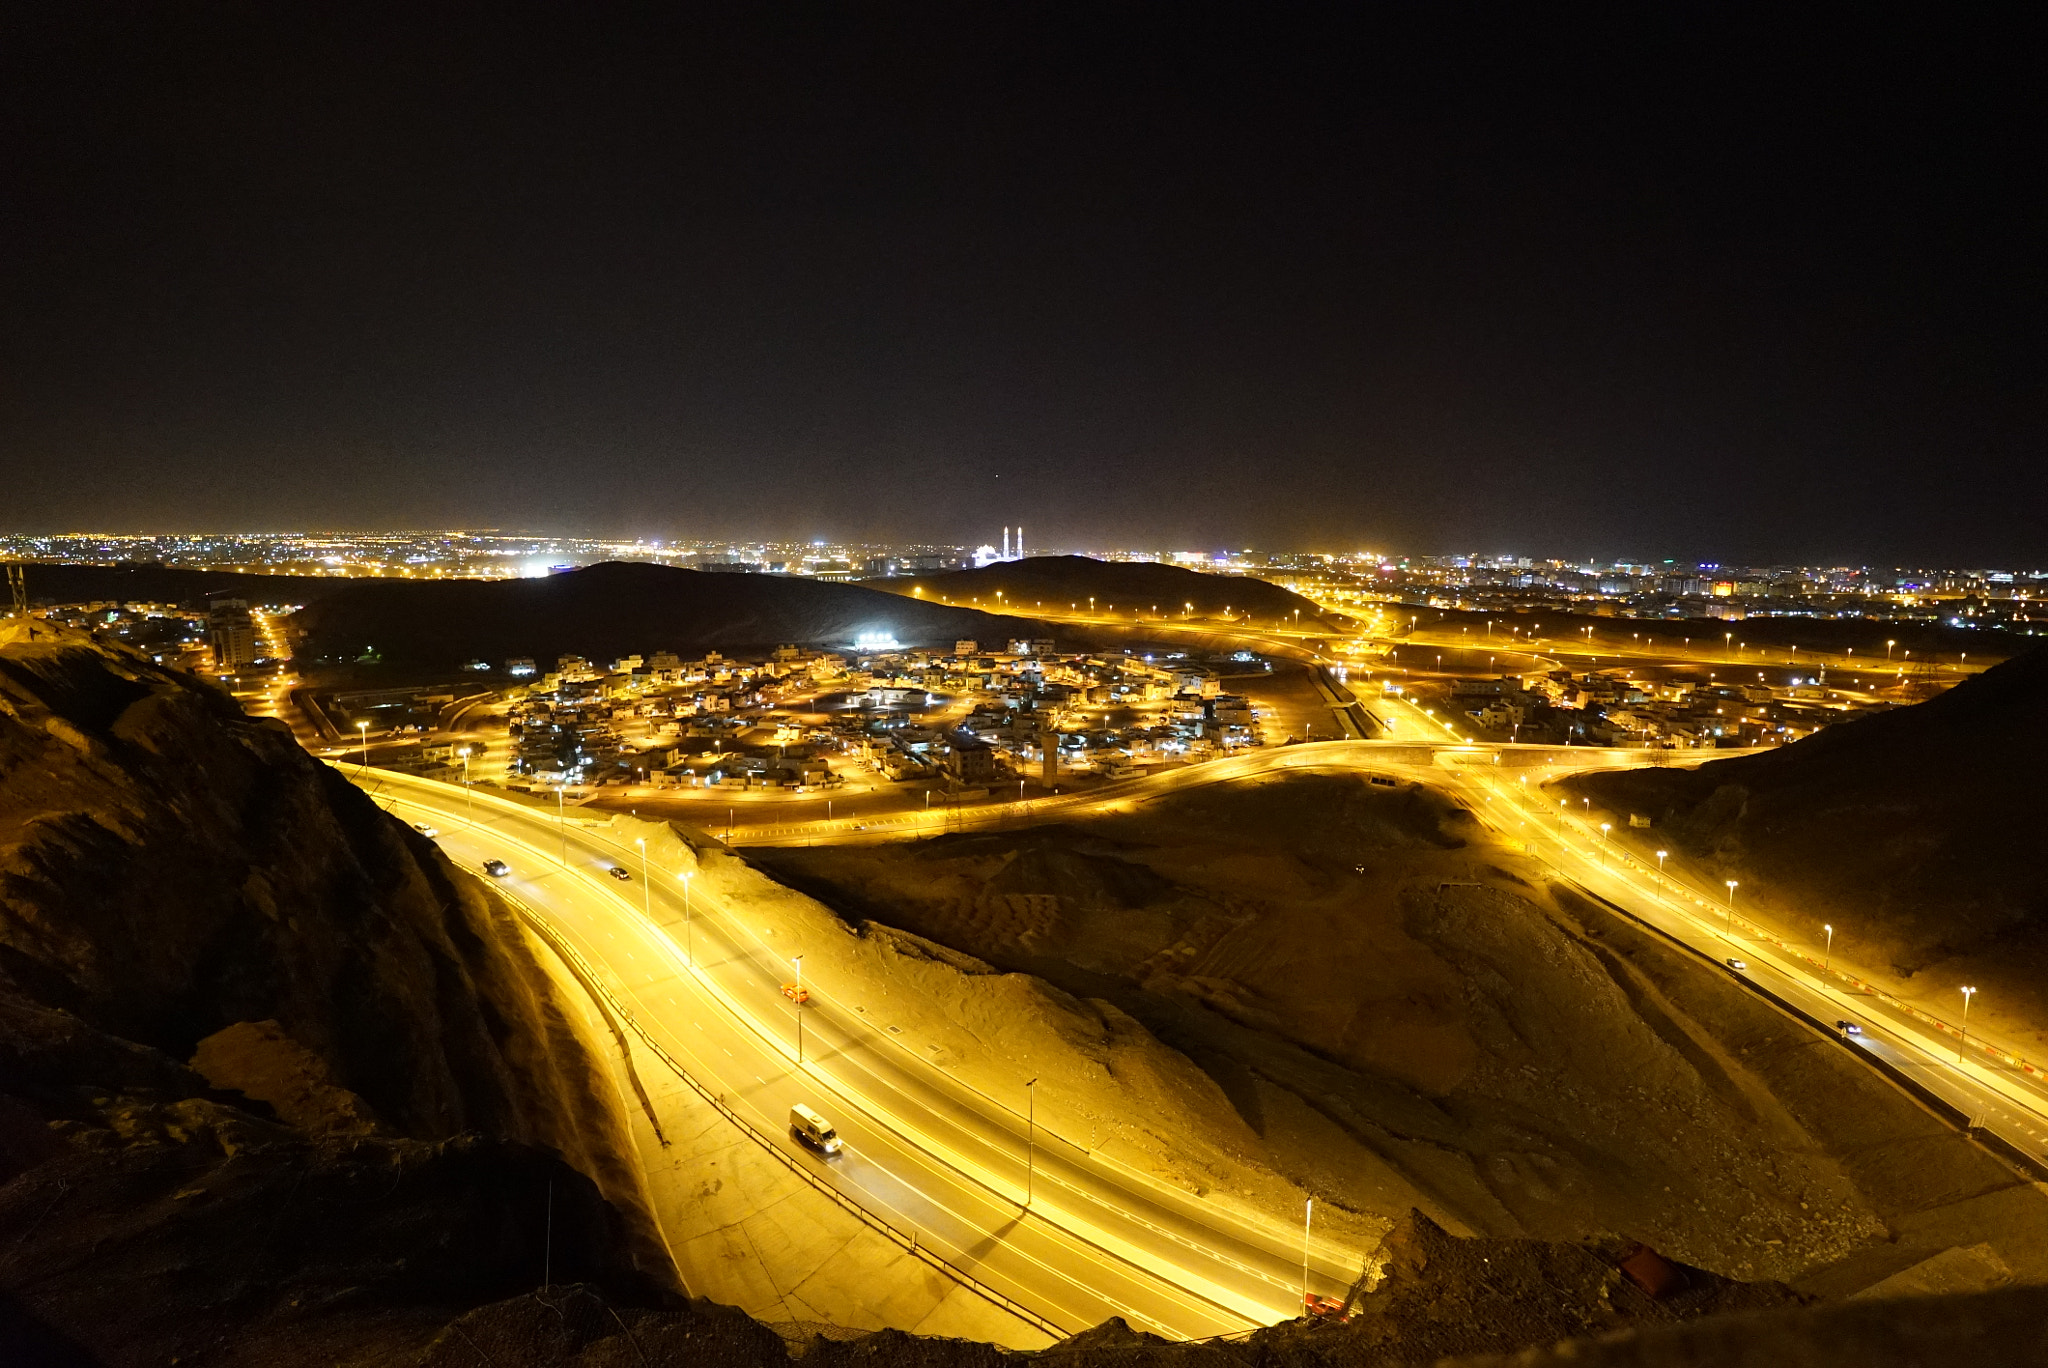 Sony a7S sample photo. A #brilliant #muscat #oman #cityscape capture from bawsher-amrat #mountain road. photography